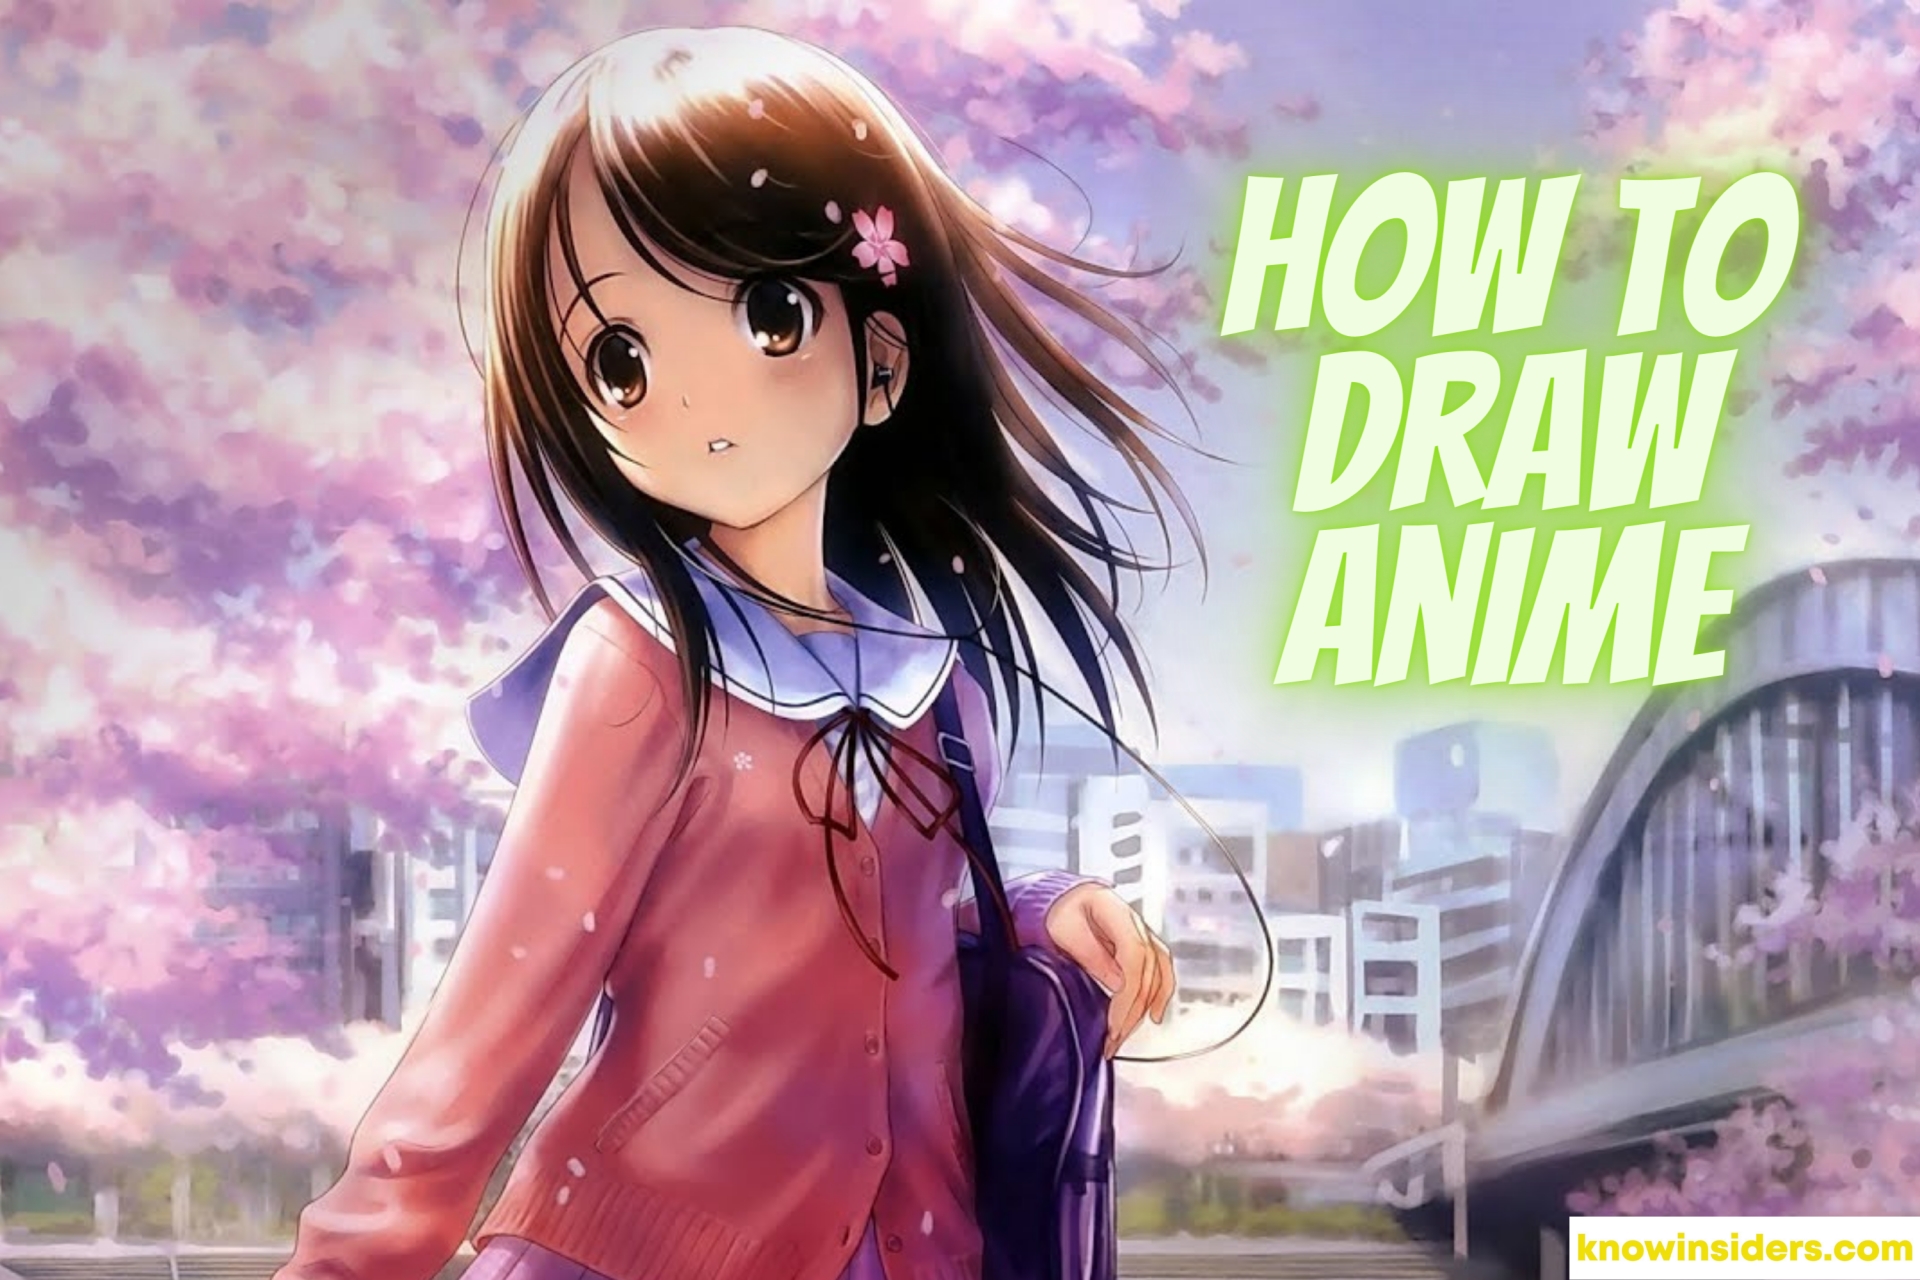 How To Draw Anime For Beginners: Step-by-Step Guide